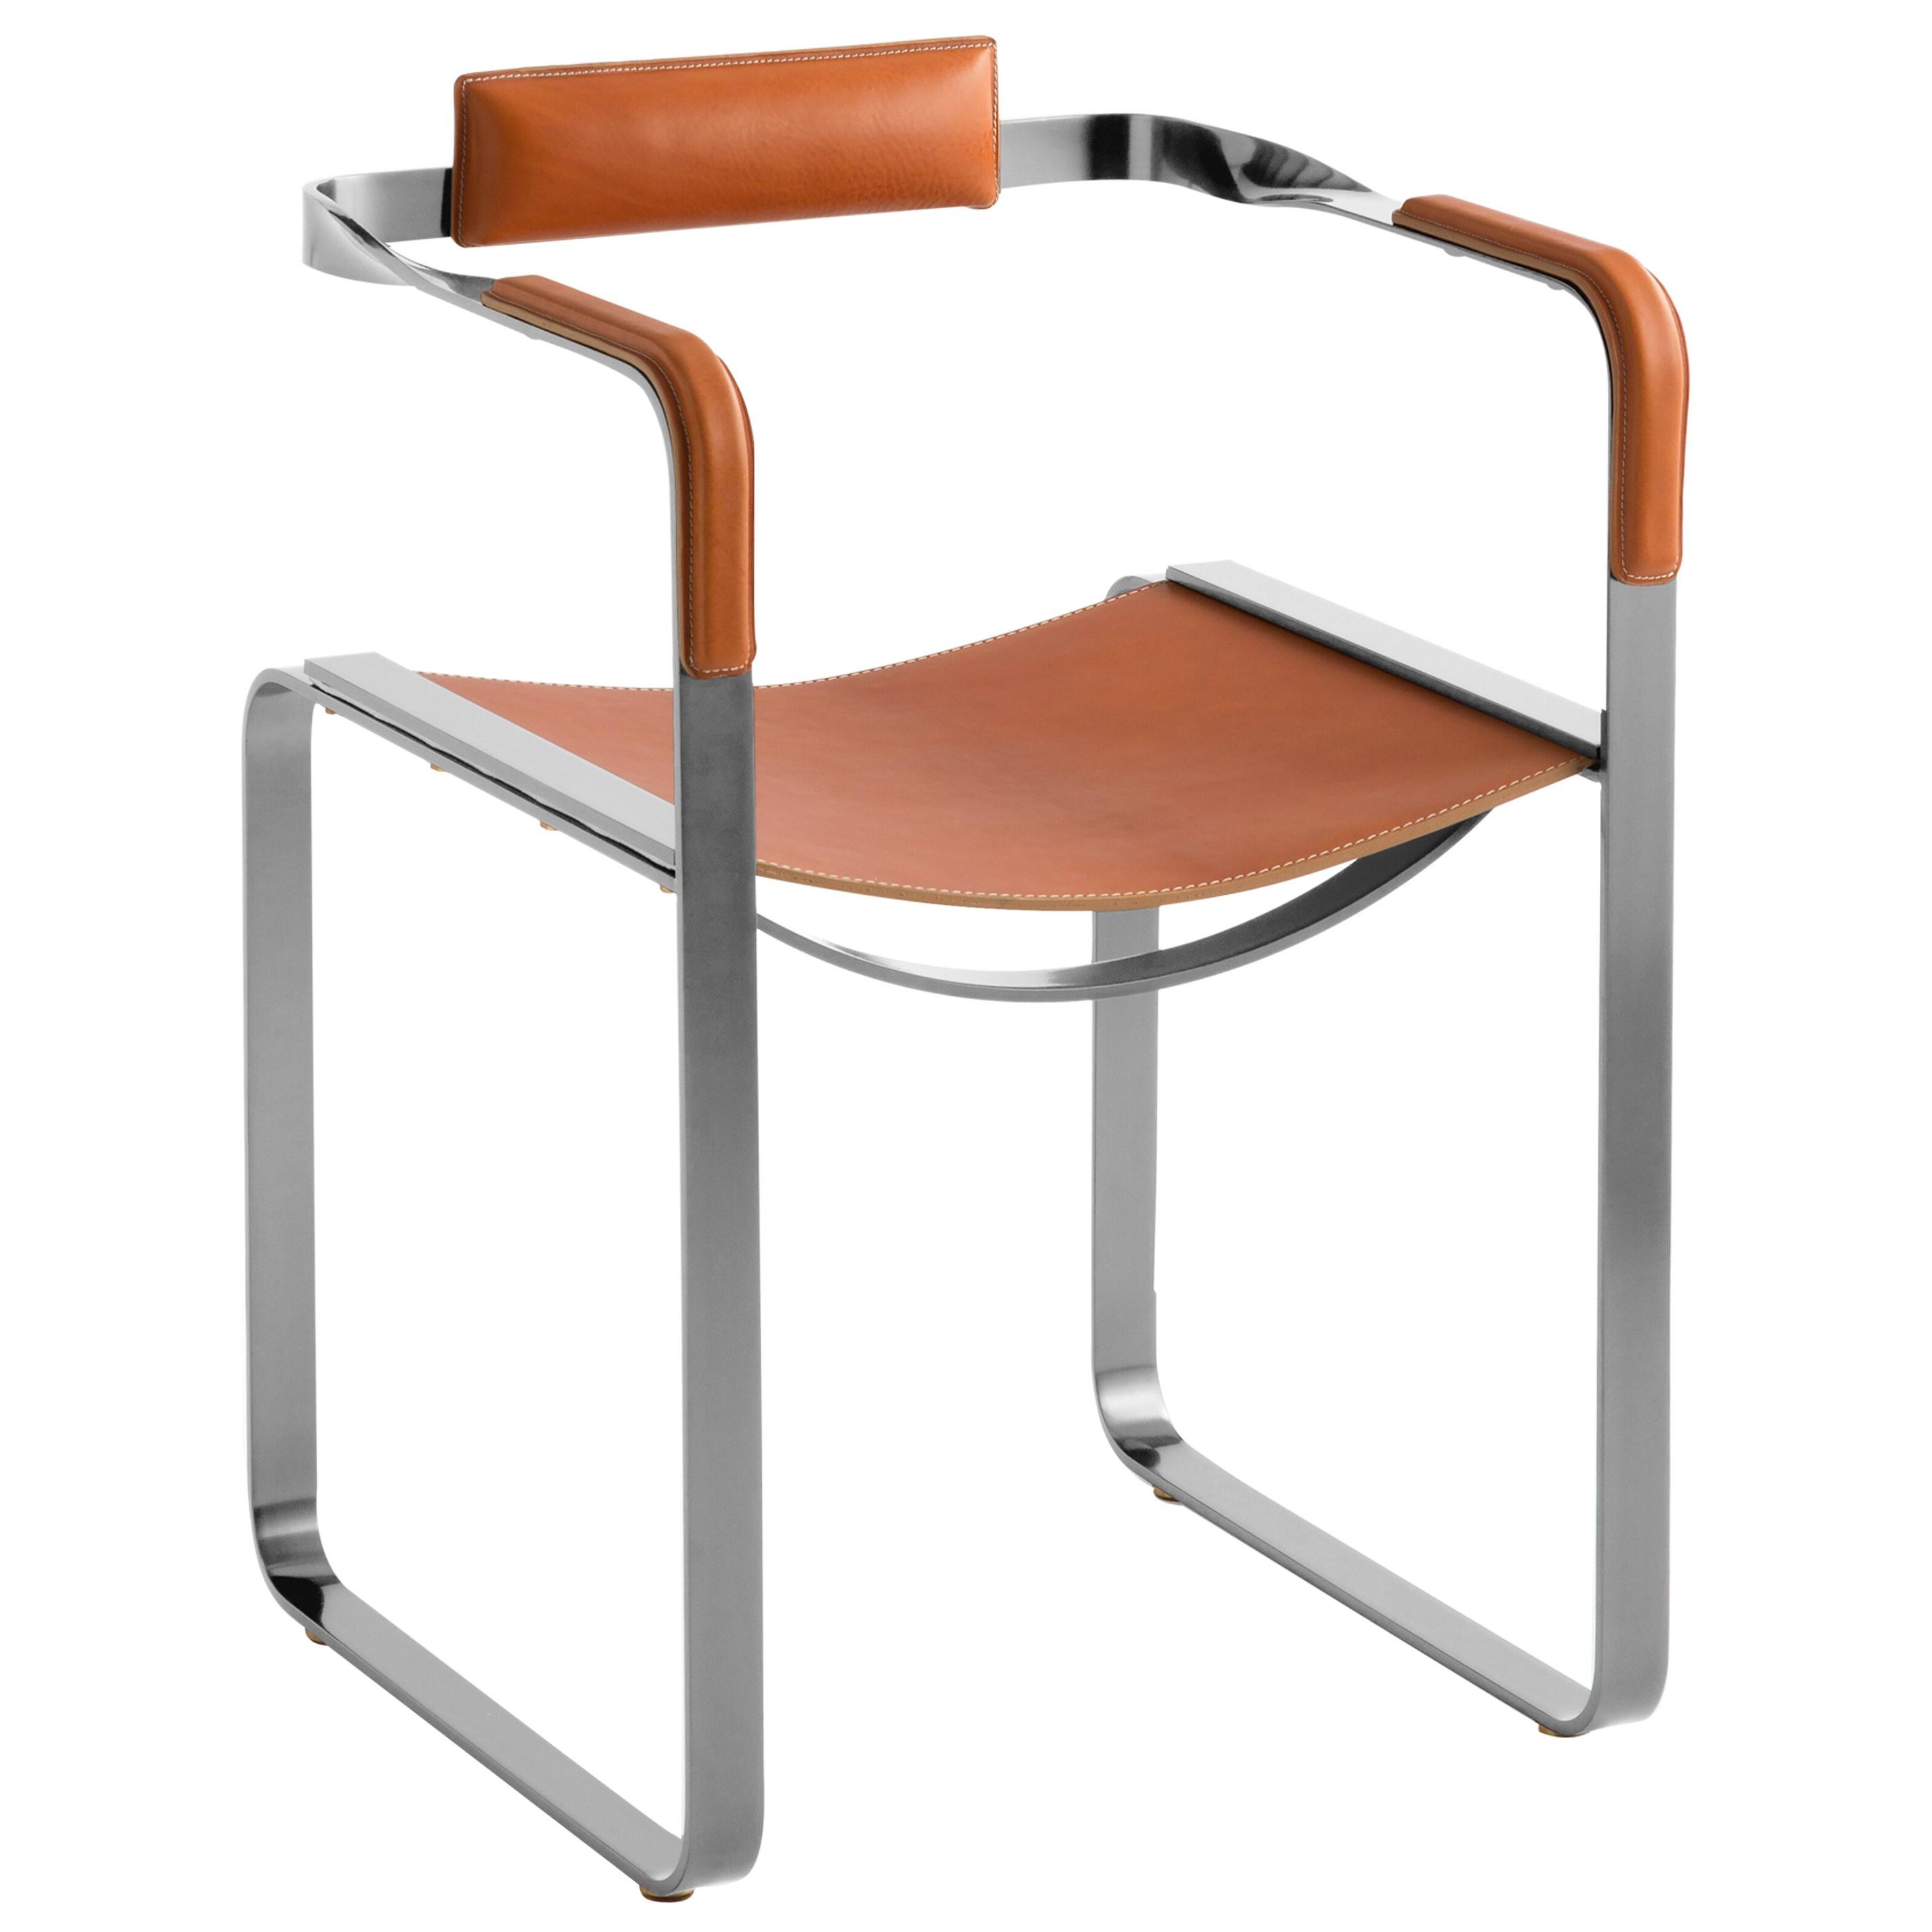 Sessel, Old Silver Steel & Natural Tobacco Saddle Leather, Contemporary Style im Angebot